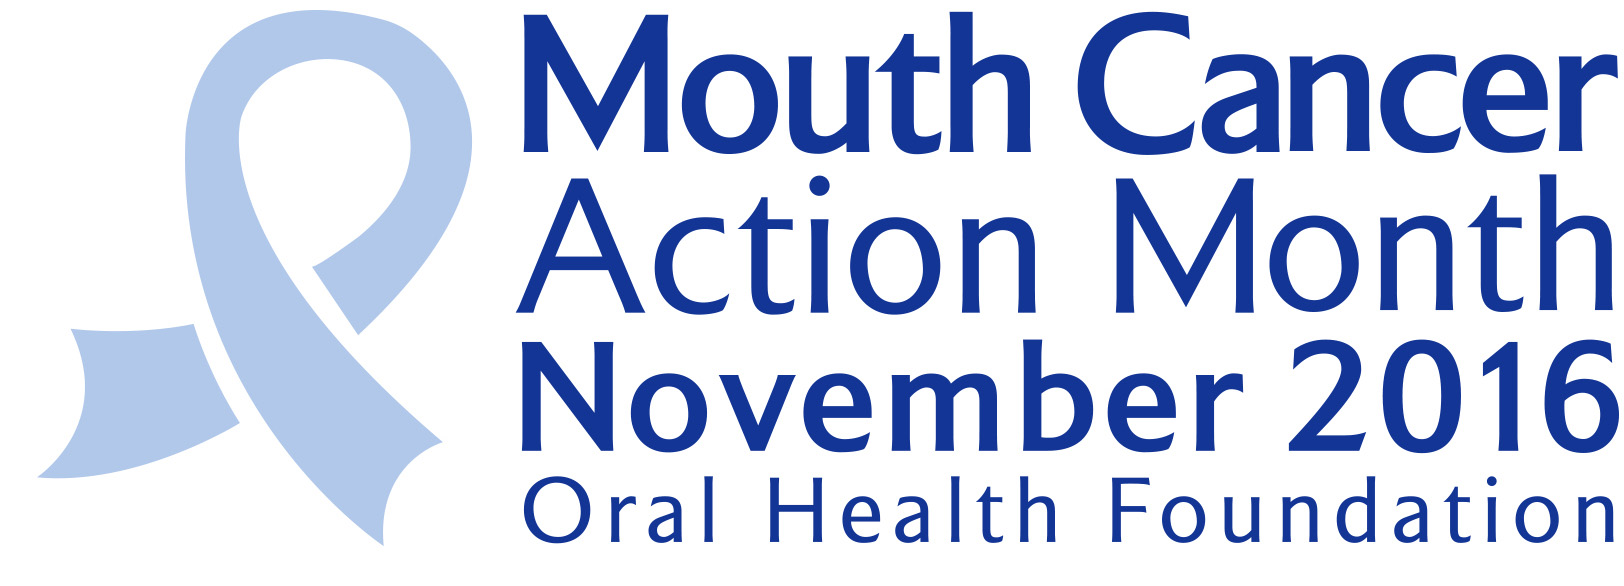 Mouth Cancer Action Month November 2016 Priory Dental Care